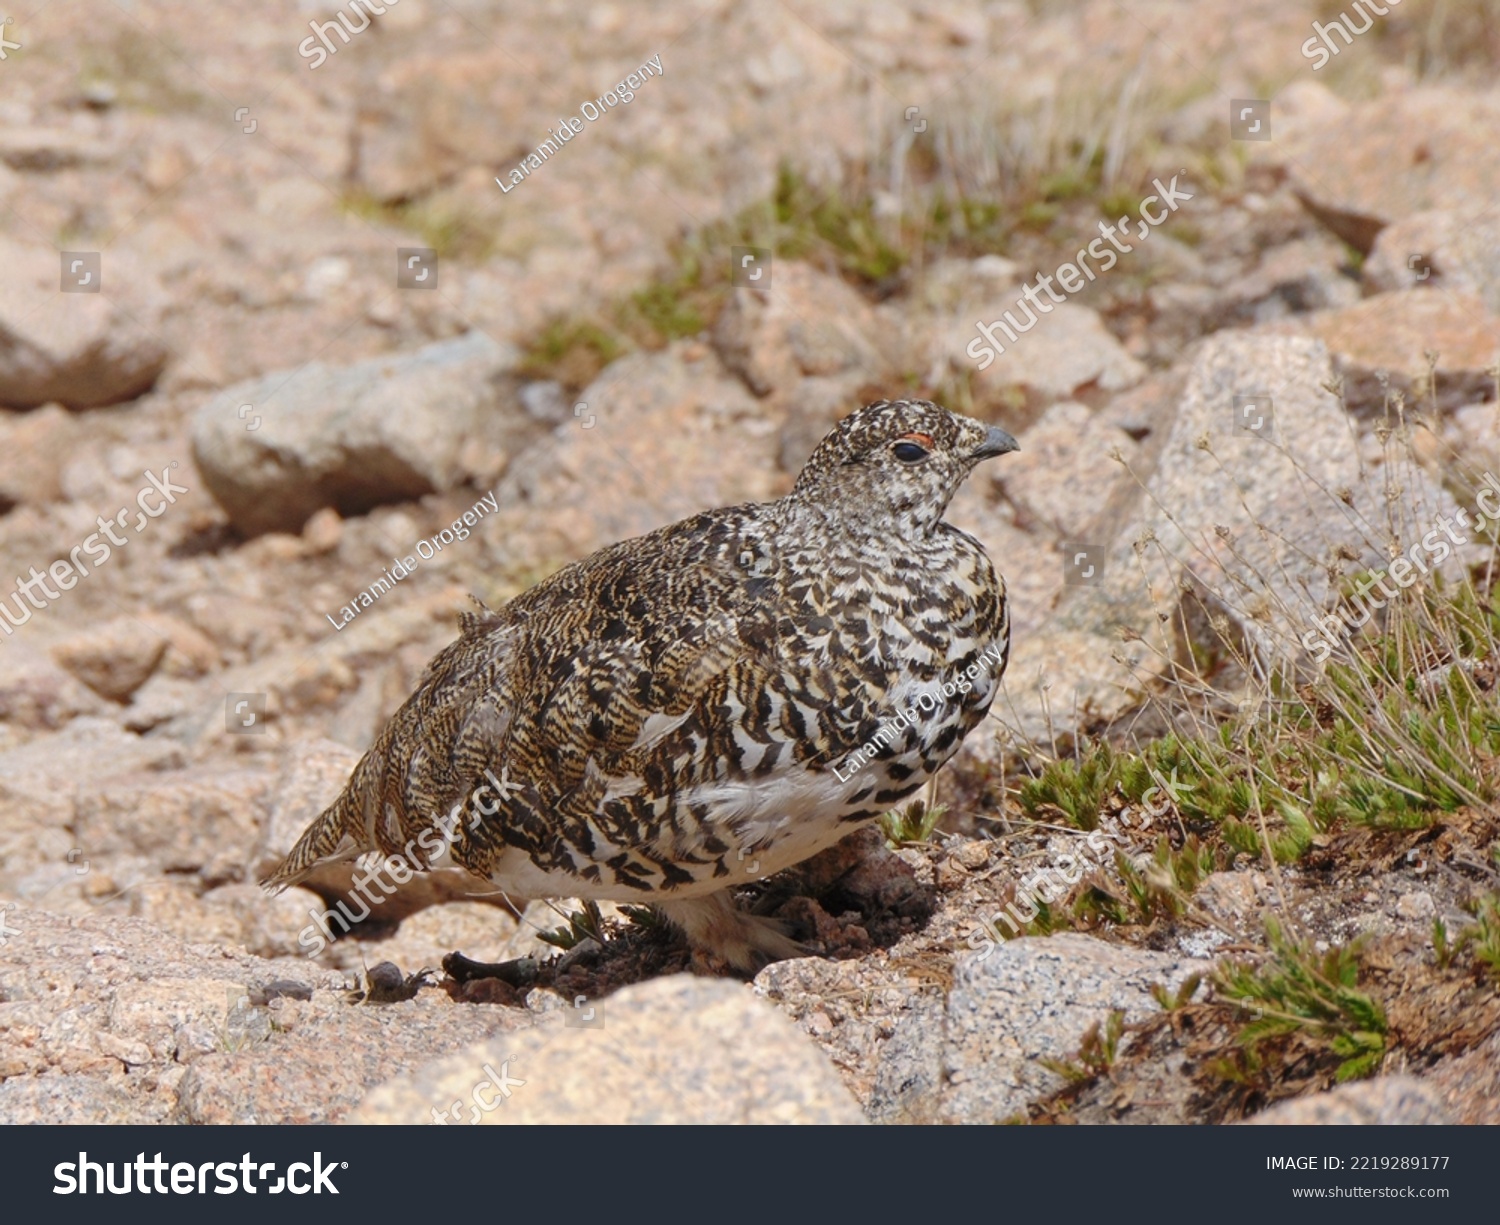 A wild Ptarmigan, a bird that relies on camouflage to remain invisible to predators. These birds are common in the Colorado high country. #2219289177